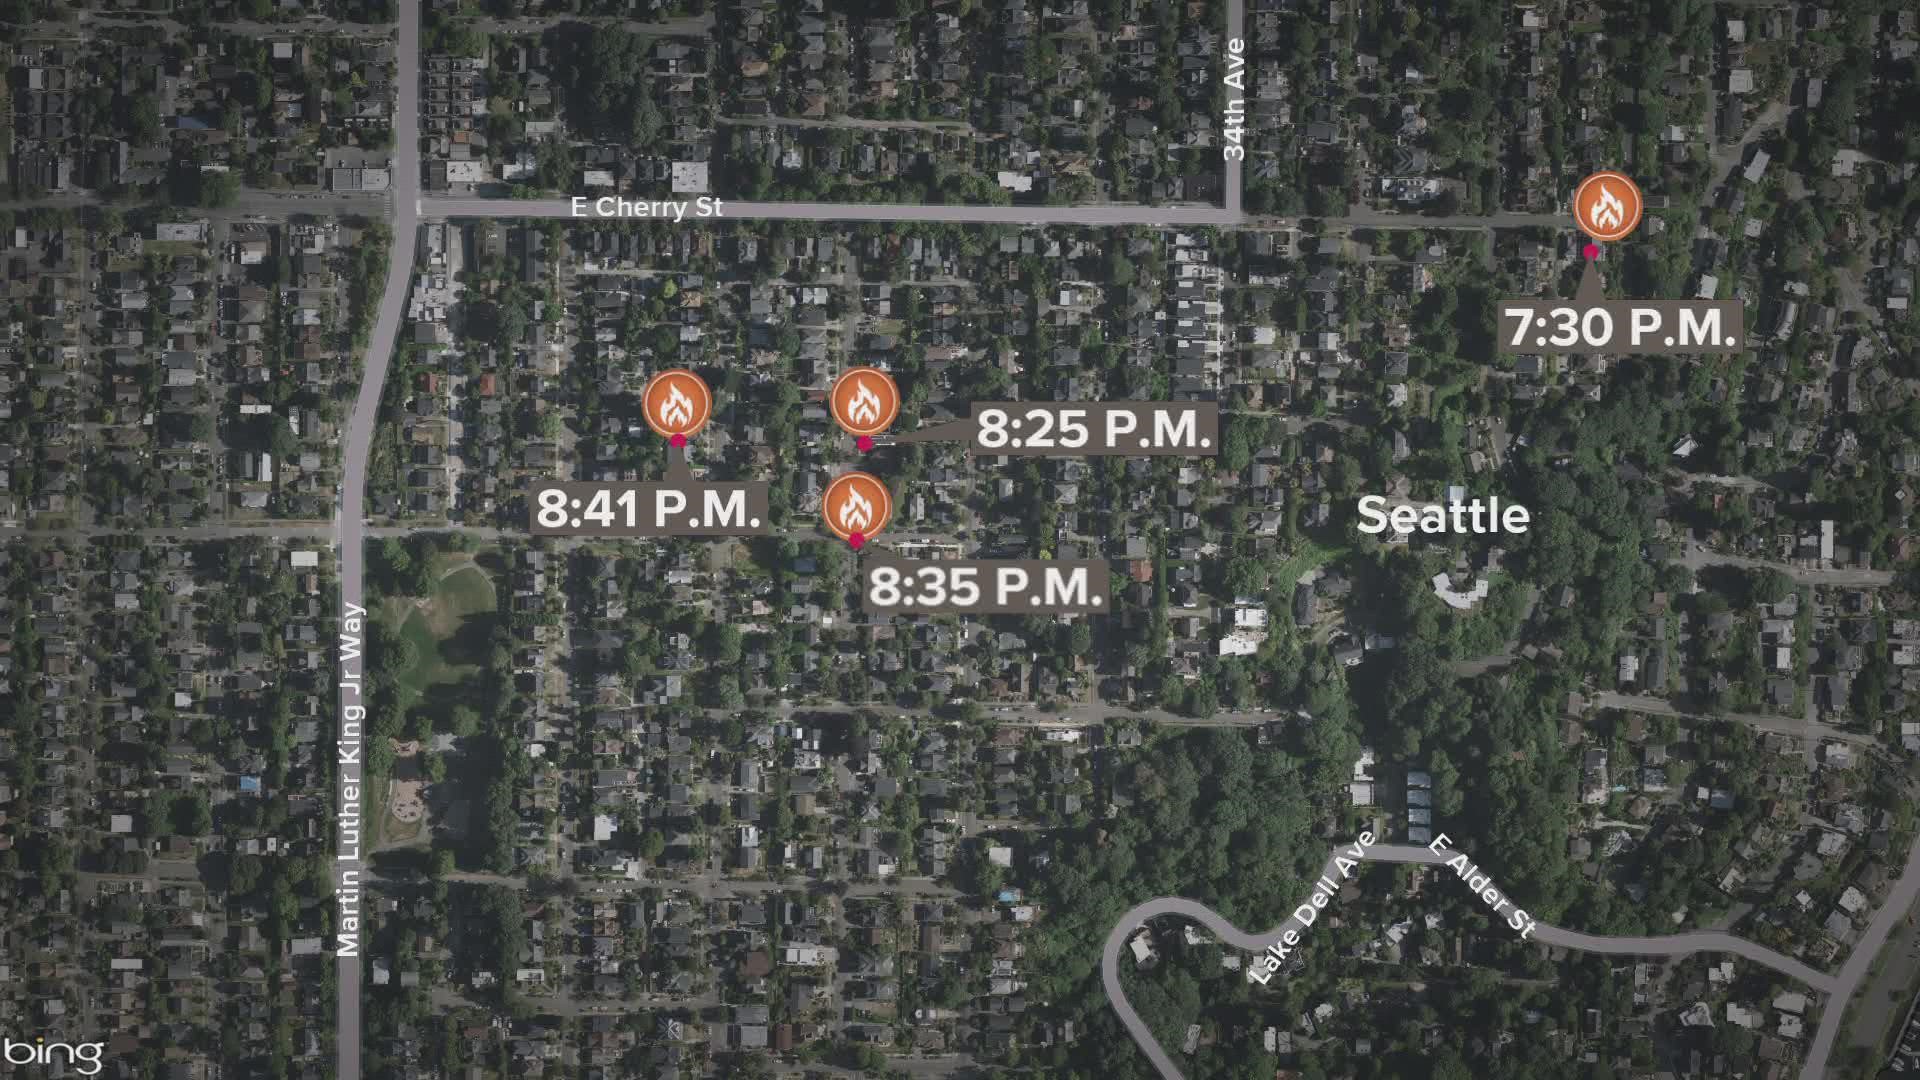 One person was arrested after allegedly setting several fires in Seattle's Central District Monday night. The four fires were reported between 7:30-8:31 p.m.